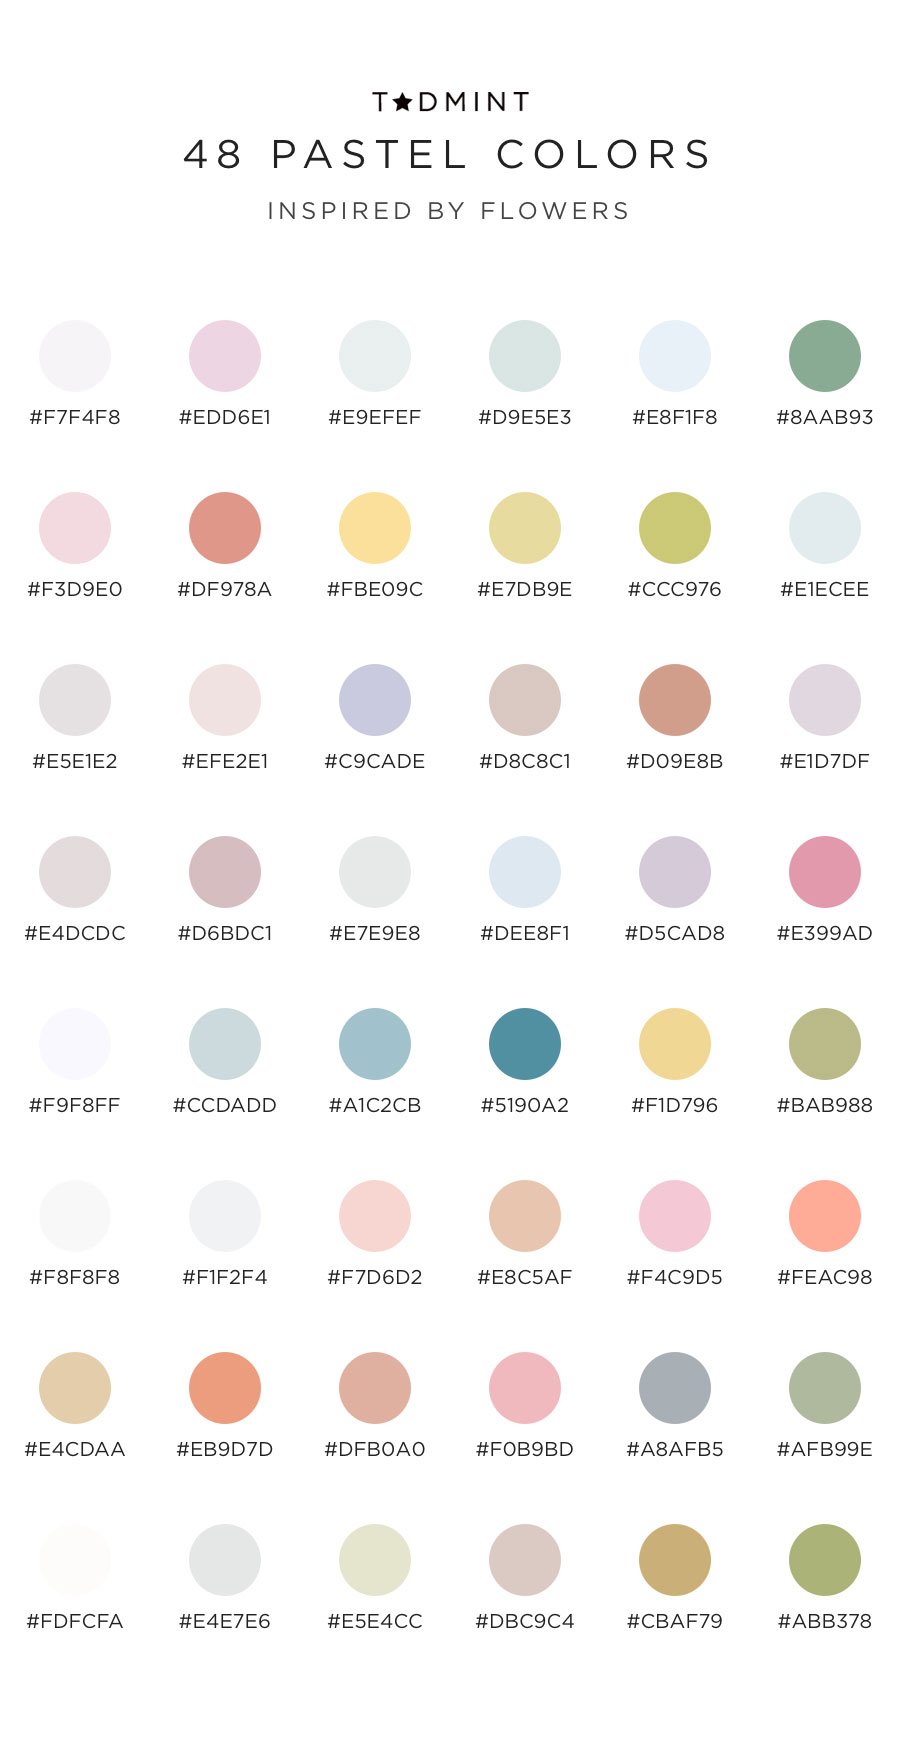 48 pastel colors inspired by flowers